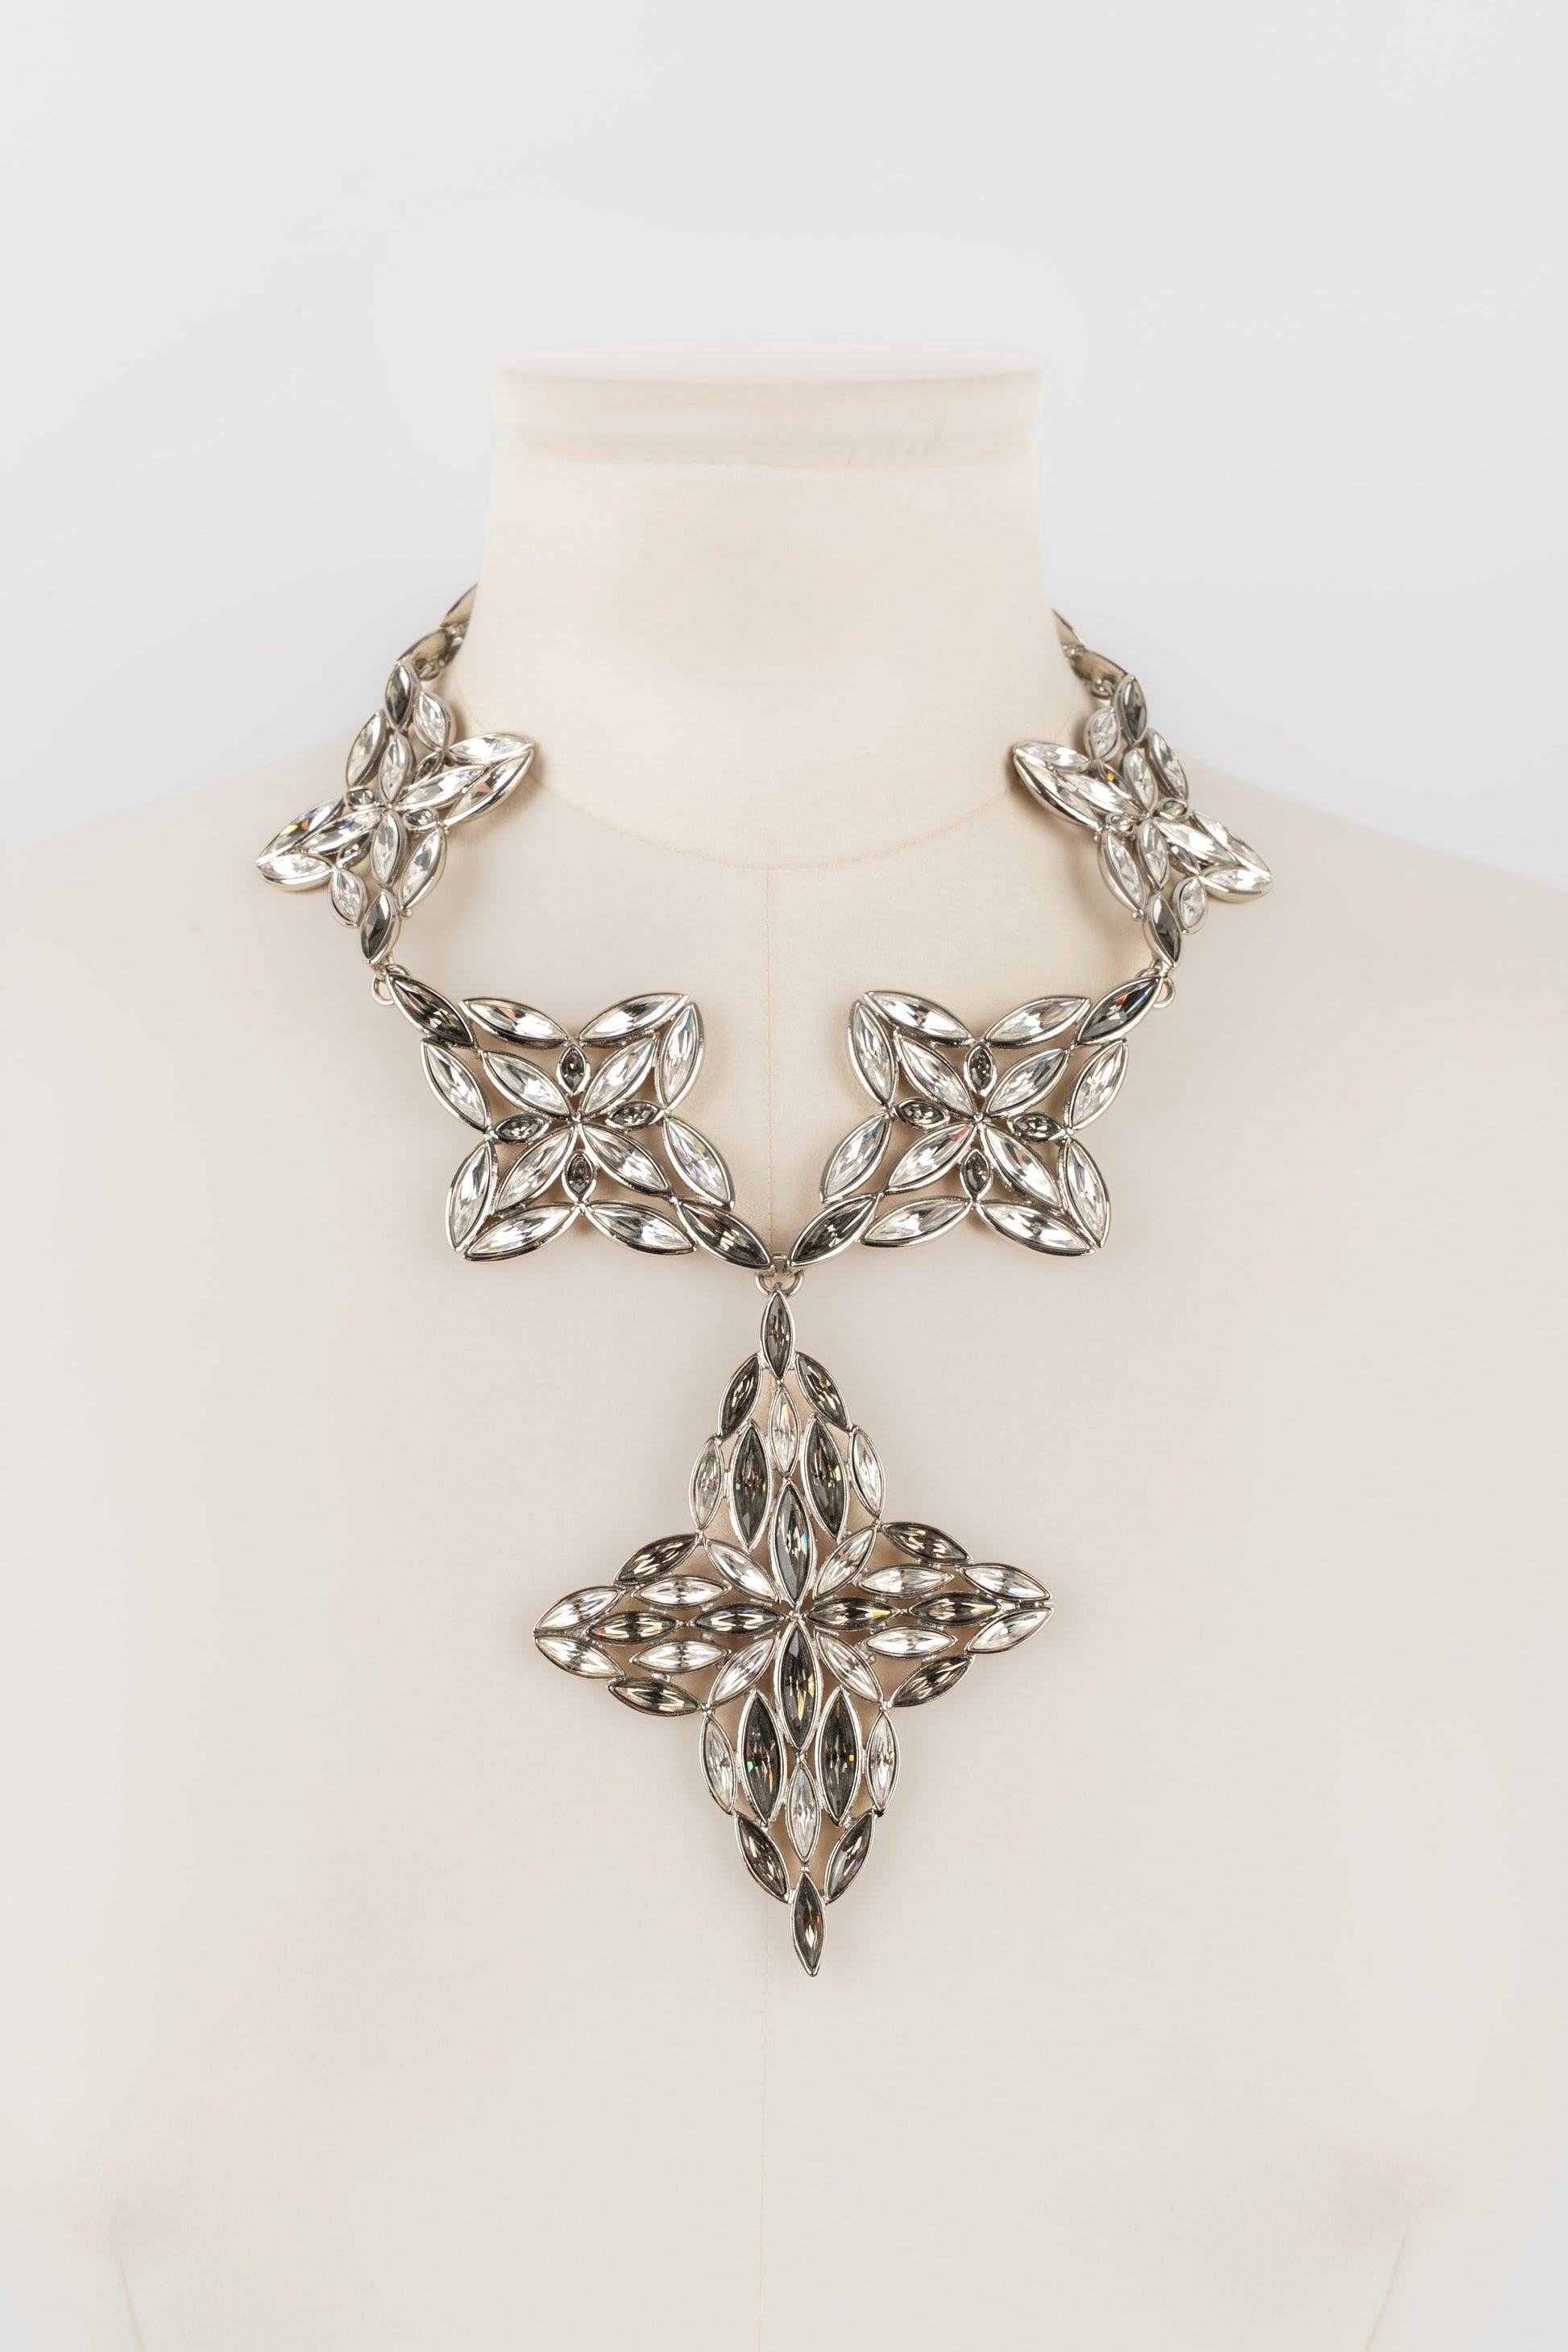 Yves Saint Laurent - (Made in France) Silvery metal necklace ornamented with rhinestones.

Additional information:
Condition: Very good condition
Dimensions: Length: from 42 cm to 48 cm

Seller Reference: BC211